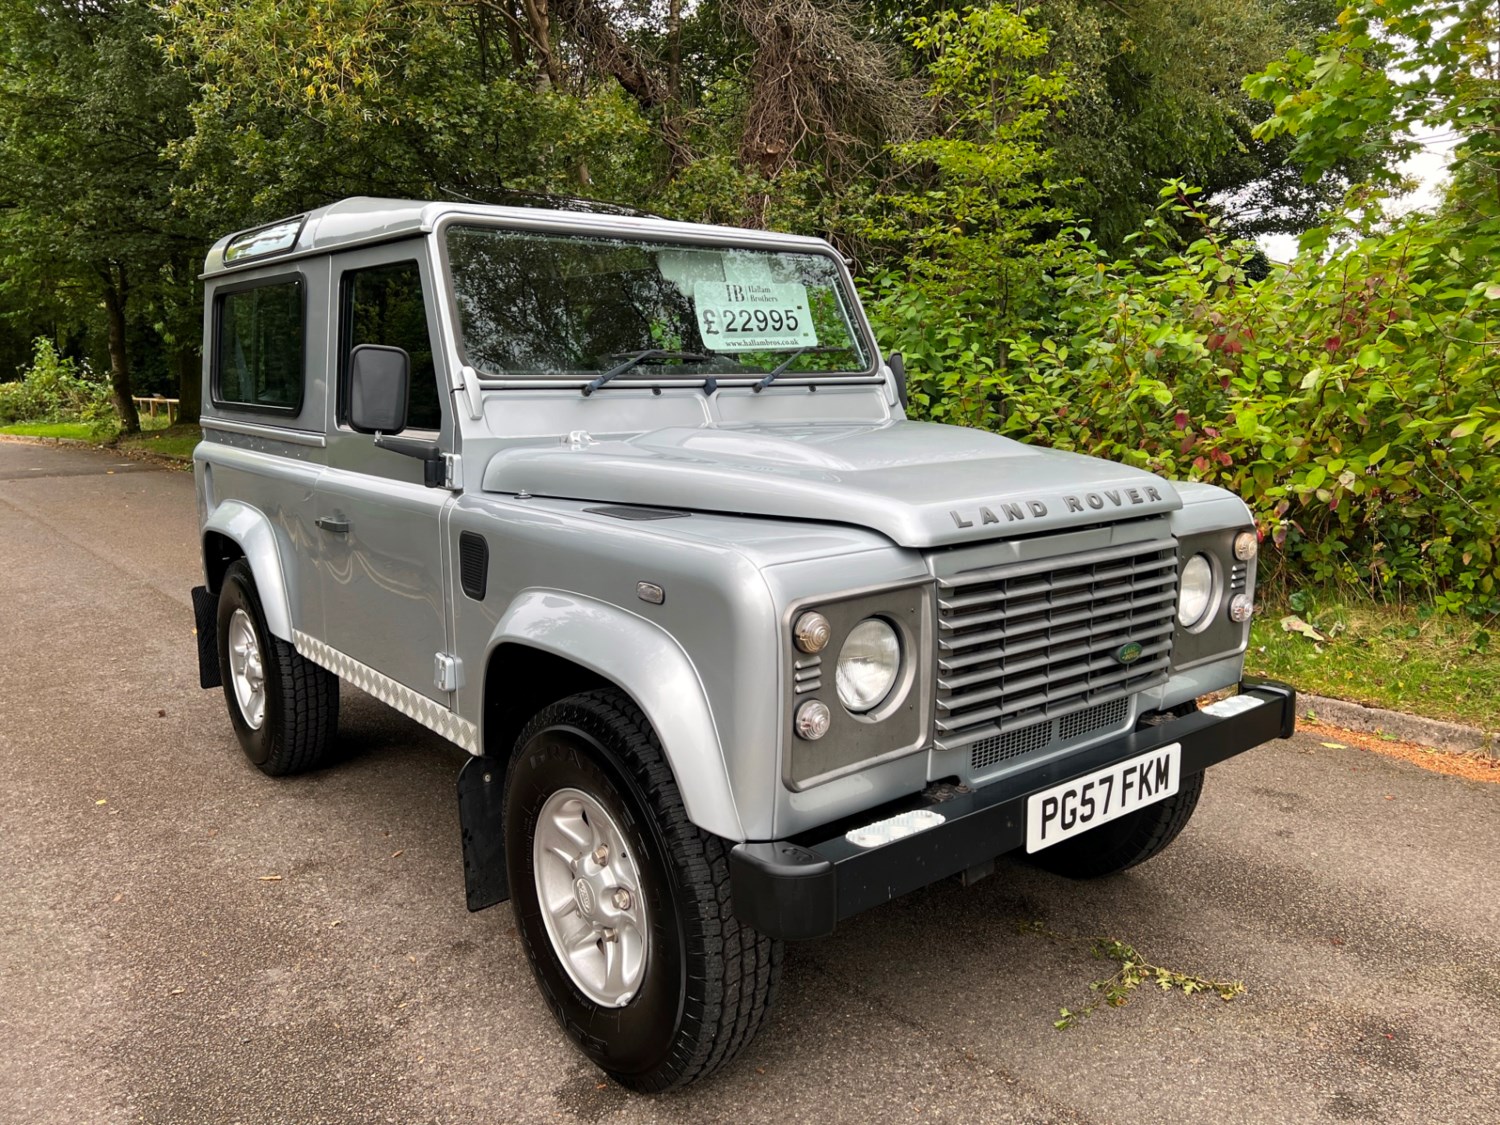 2007 (57) Land Rover Defender 90 County Station Wagon TDCi For Sale In High Peak, Derbyshire